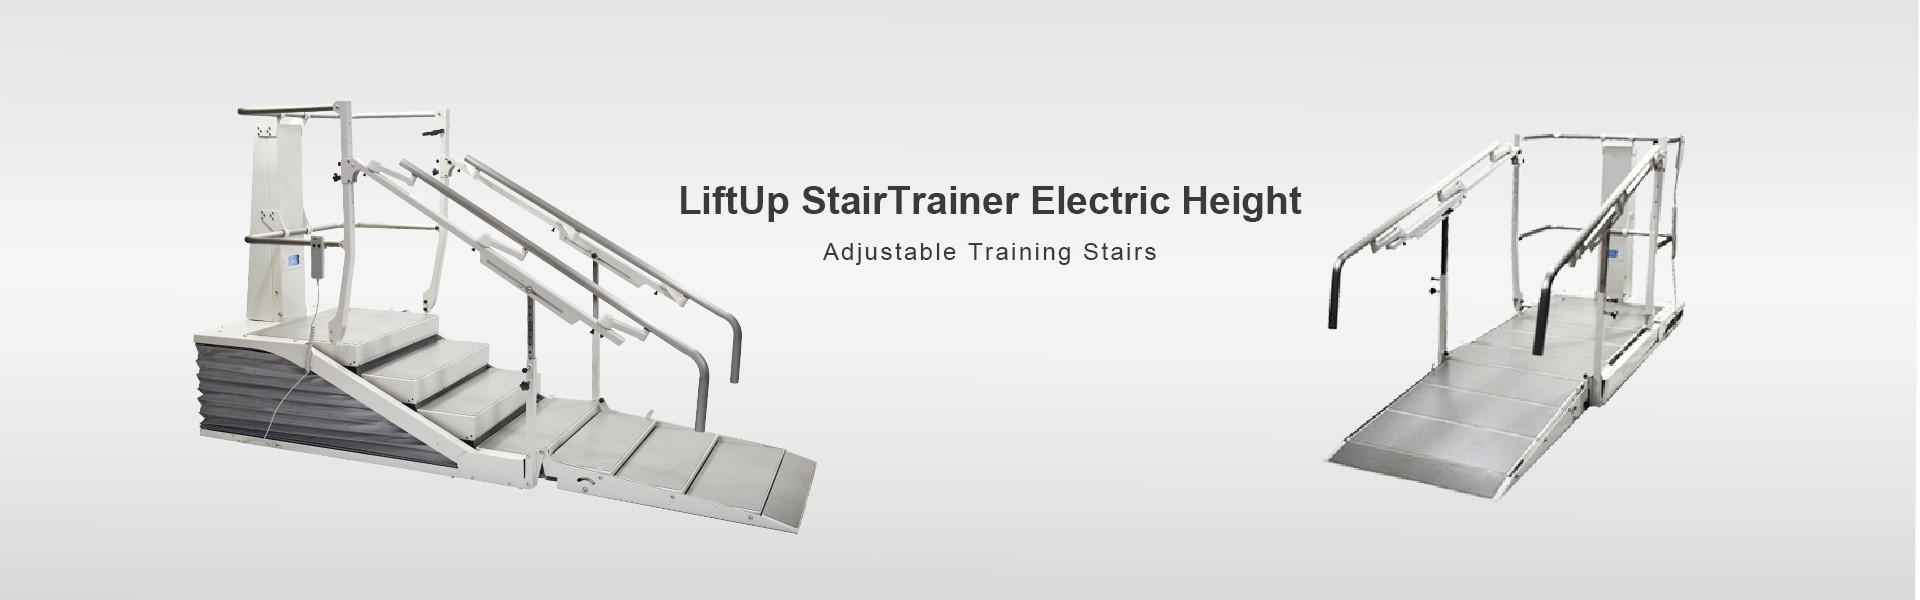 Liftup Stairtrainer Electric